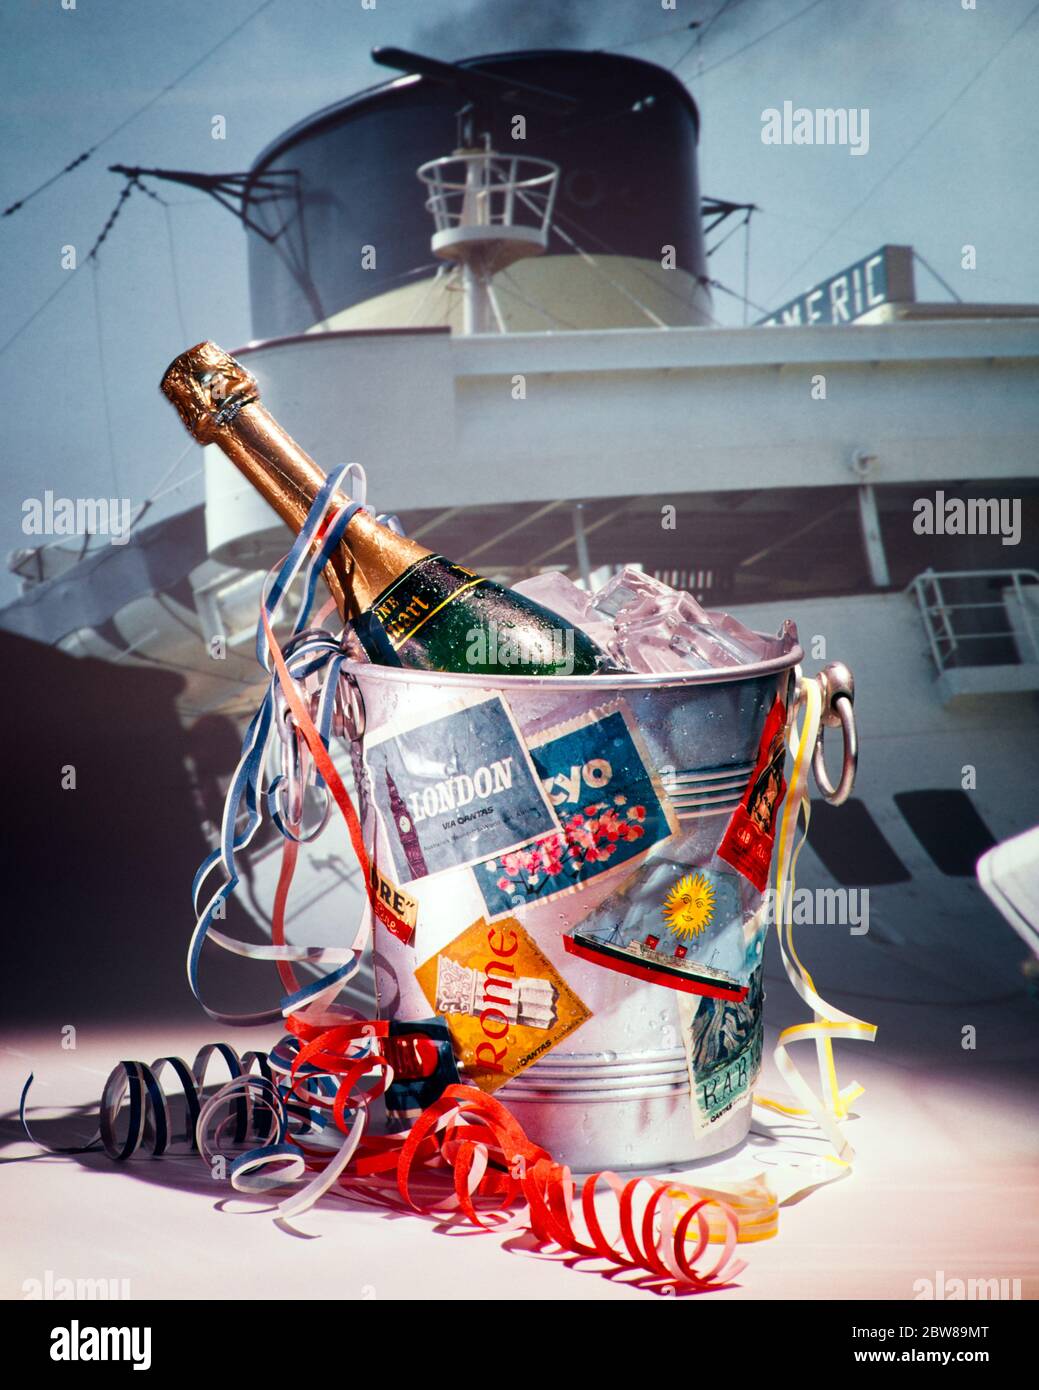 1970s OCEAN LINER STEAM SHIP SAILING DEPARTURE SYMBOLIC STILL LIFE SET-UP UNOPENED CHAMPAGNE BOTTLE ON ICE AND PAPER STREAMERS   - ks8798 PHT001 HARS TRANSPORTATION GOALS COVERED DREAMS HAPPINESS NOURISH ADVENTURE LEISURE SHIPBOARD SMOKEY AND LOW ANGLE RECREATION VOYAGE BON VOYAGE CONCEPTUAL STILL LIFE MOBILITY NOURISHMENT STYLISH SET-UP STEAM SHIP SYMBOLIC CHAMPAGNE BOTTLE CHAMPAGNE BOTTLES OCEAN LINER RELAXATION UNOPENED DEPARTURE OLD FASHIONED Stock Photo